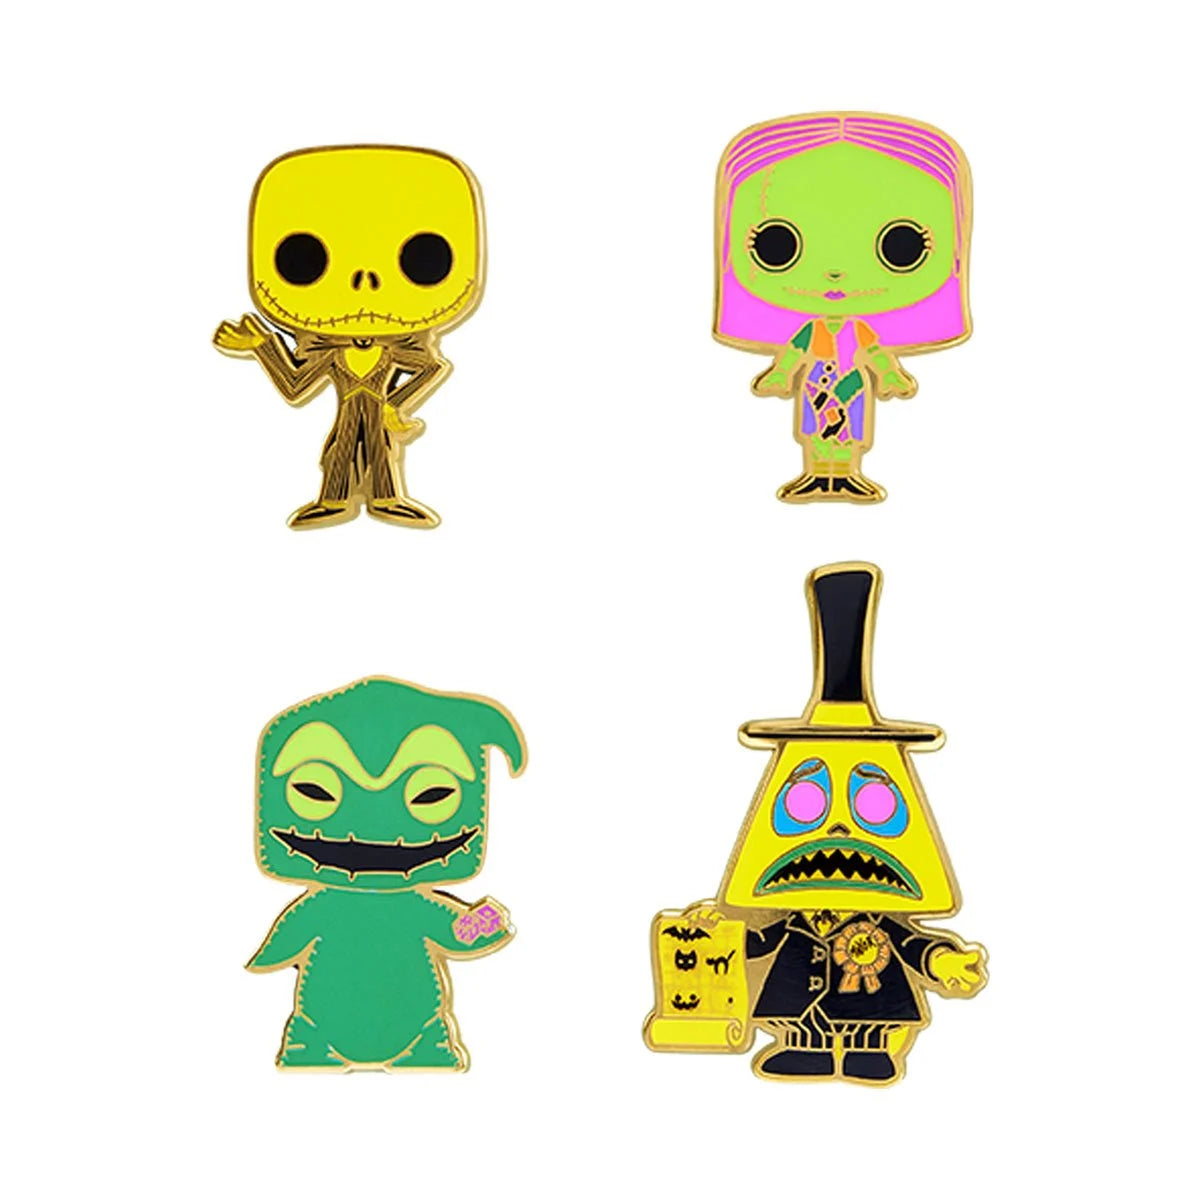 The Nightmare Before Christmas Black Light Pin 4-Pack Set